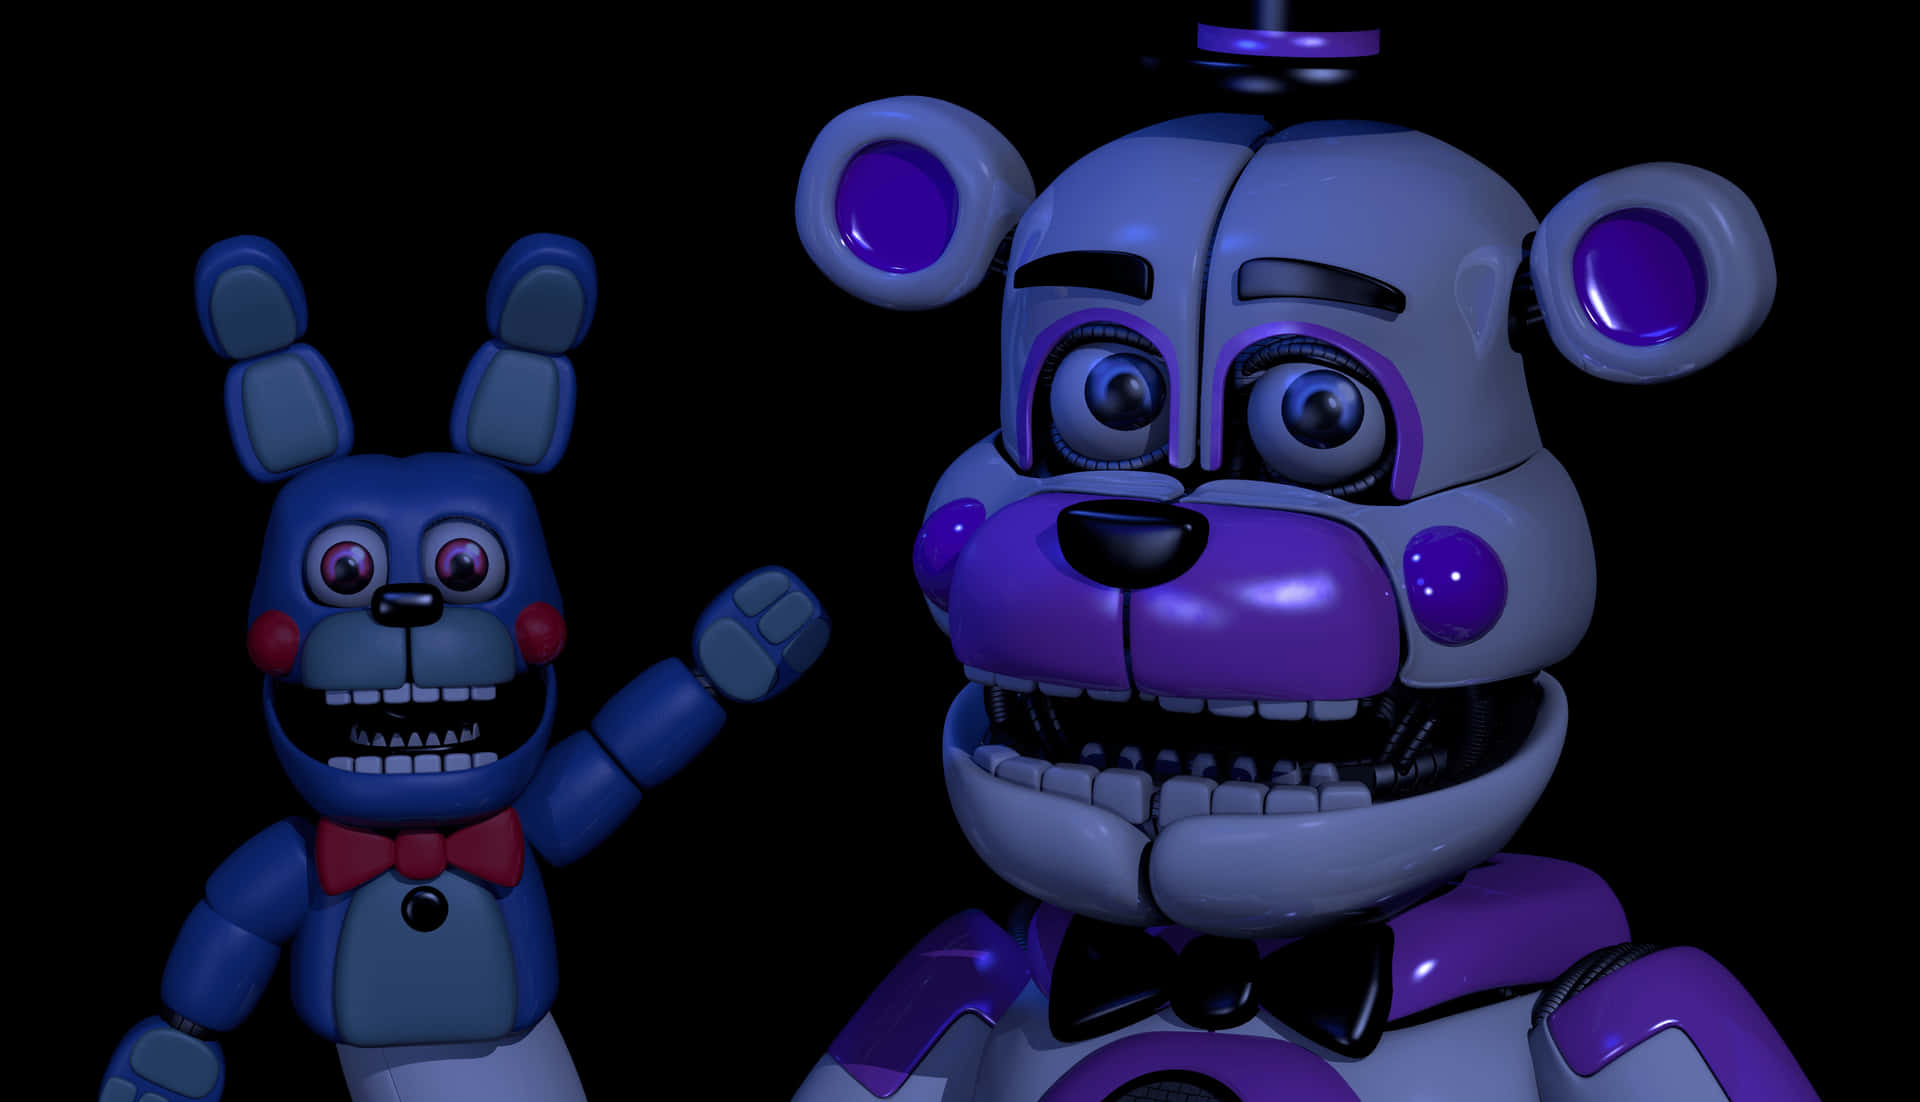 Experience the excitement of Funtime Freddy in dazzling high resolution. Wallpaper